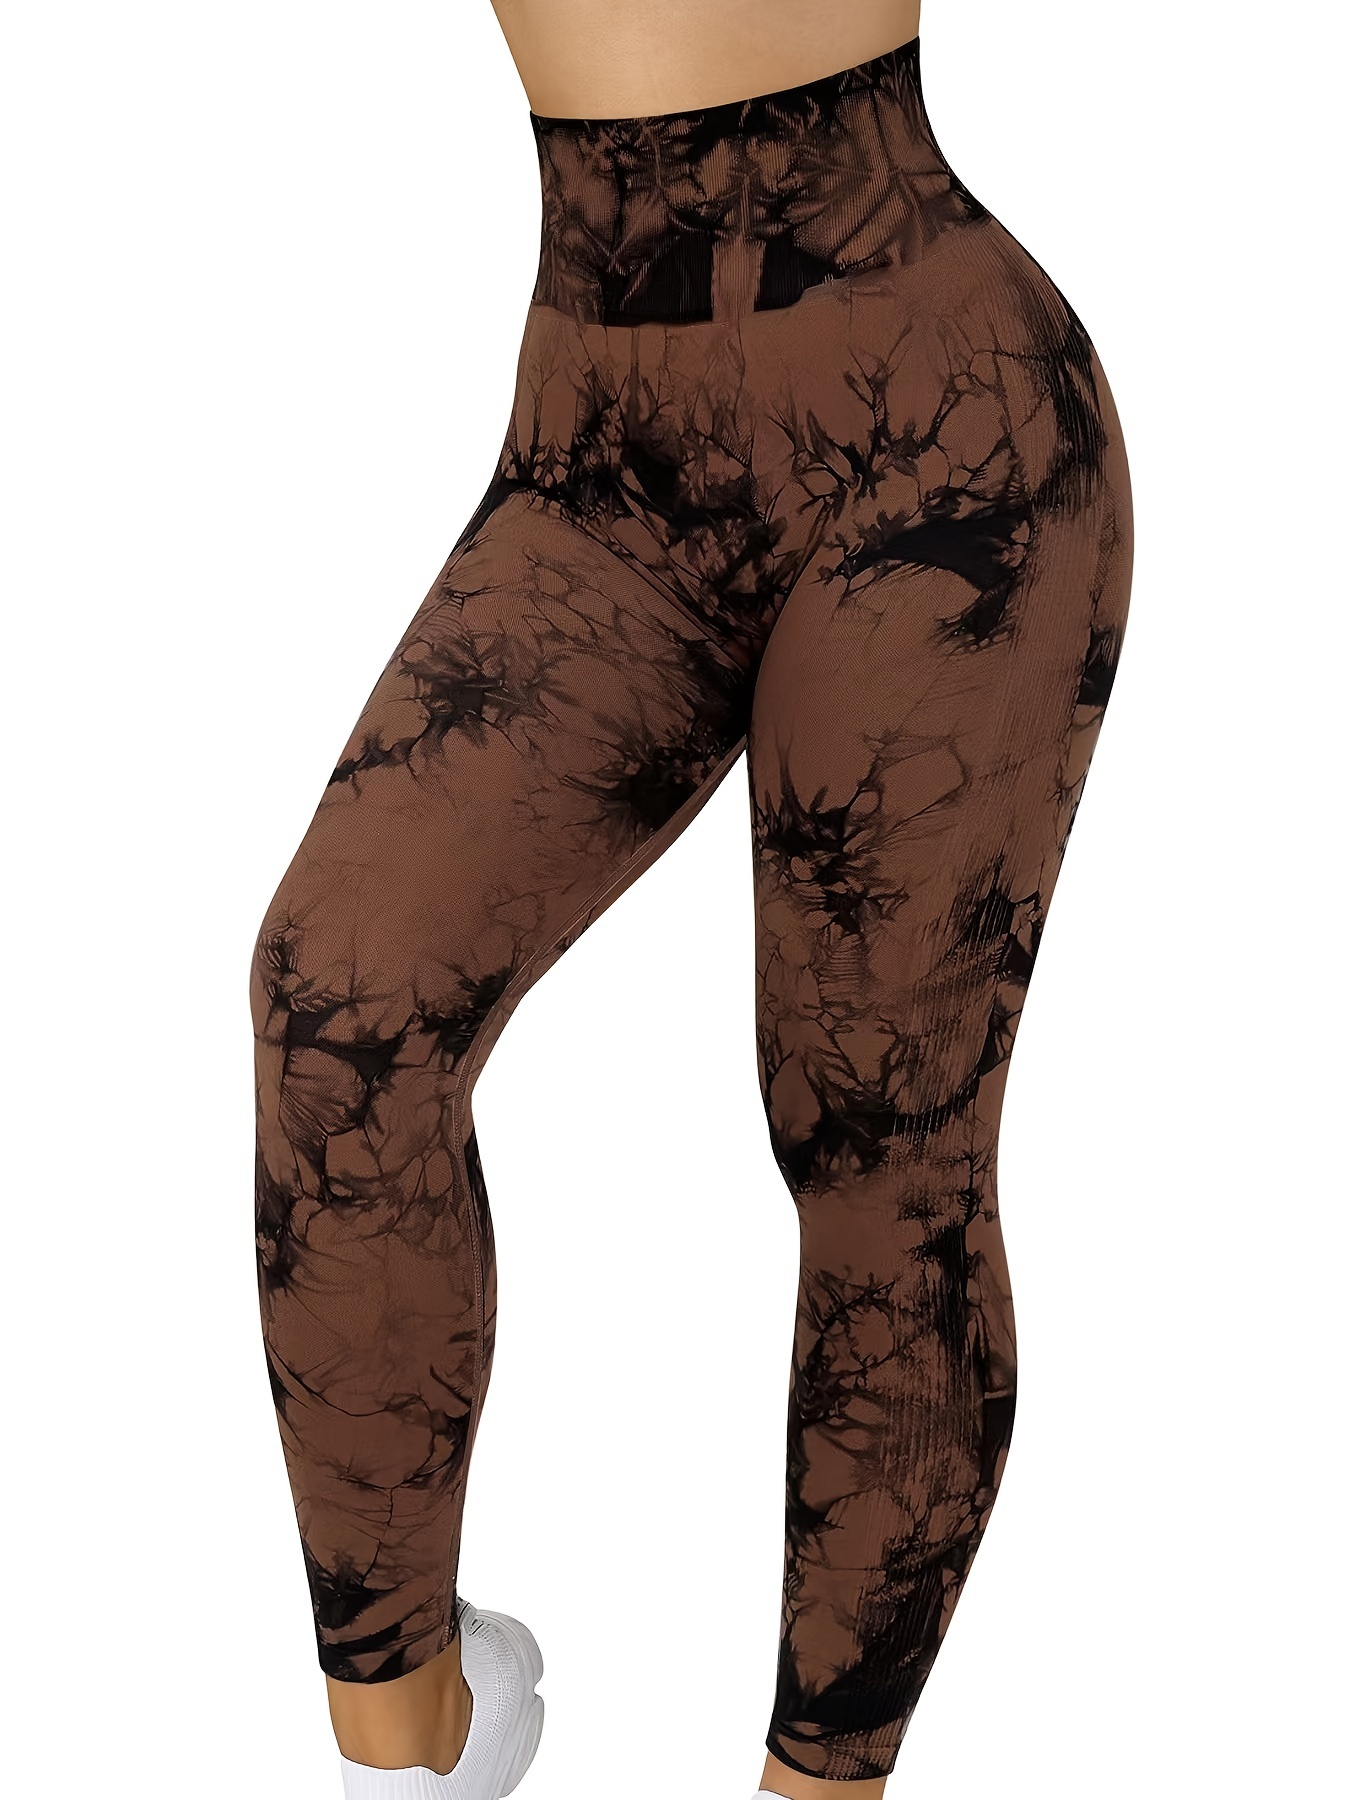 High-Waisted Lace Seamless Legging